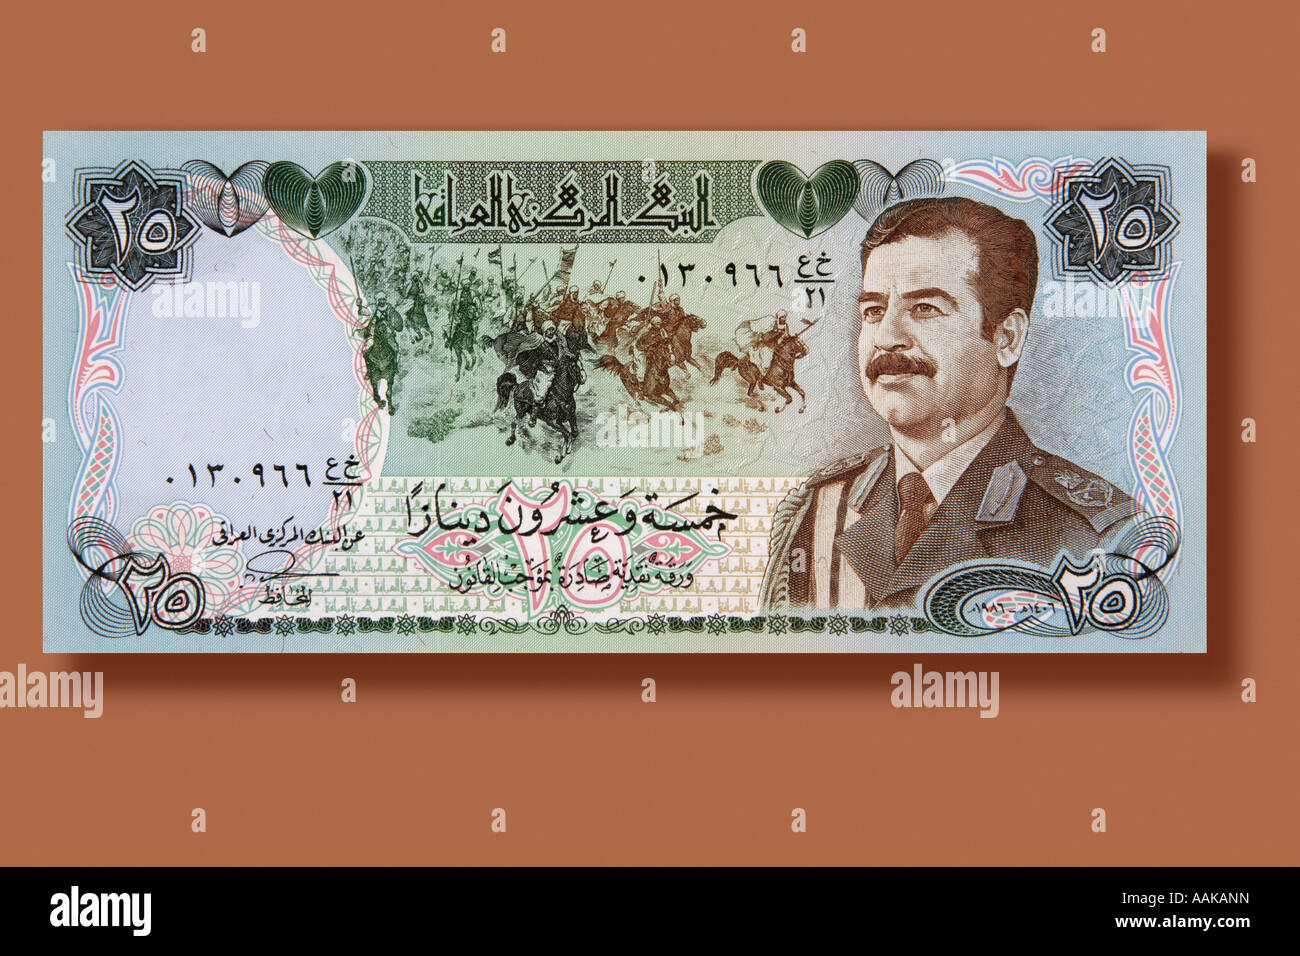 Paper money 25 Dinar note from Iraq These bills are from the former regime run by the dictator Suddam Hussein Stock Photo